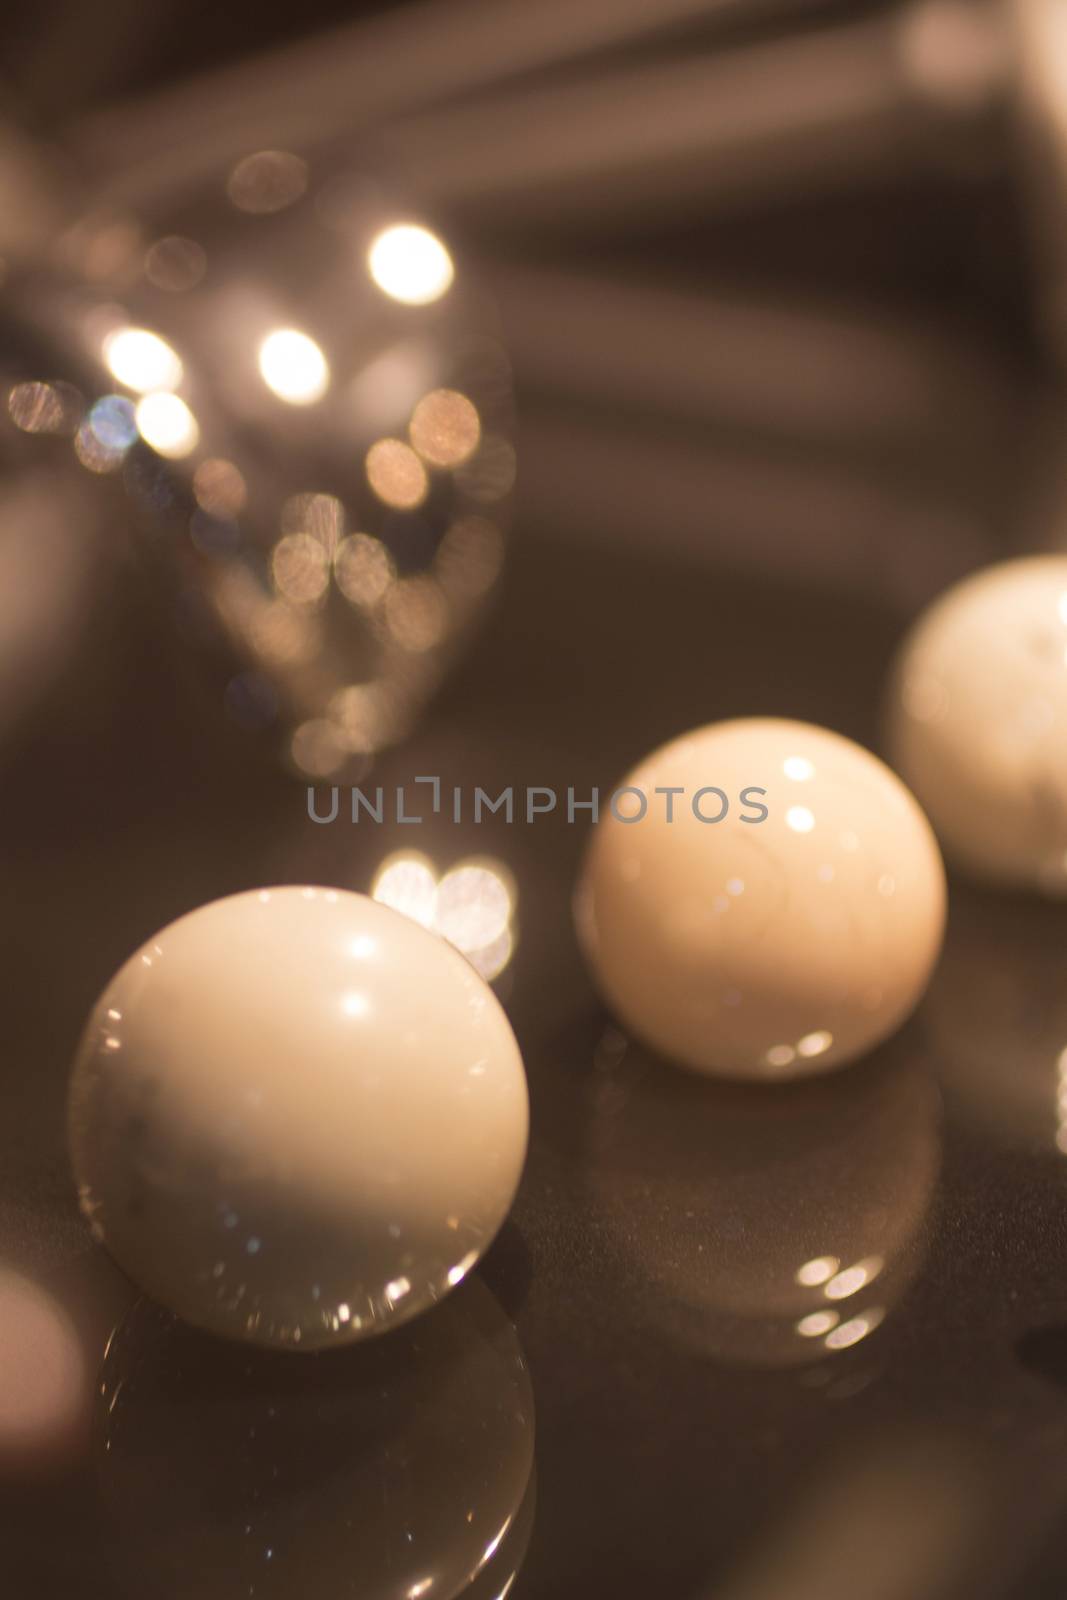 Three round traumatology and orthopedic surgery ball and socket joint implants. Still life color digital photo in brown tones with shallow depth of focus bokeh artistic effect and reflection. 